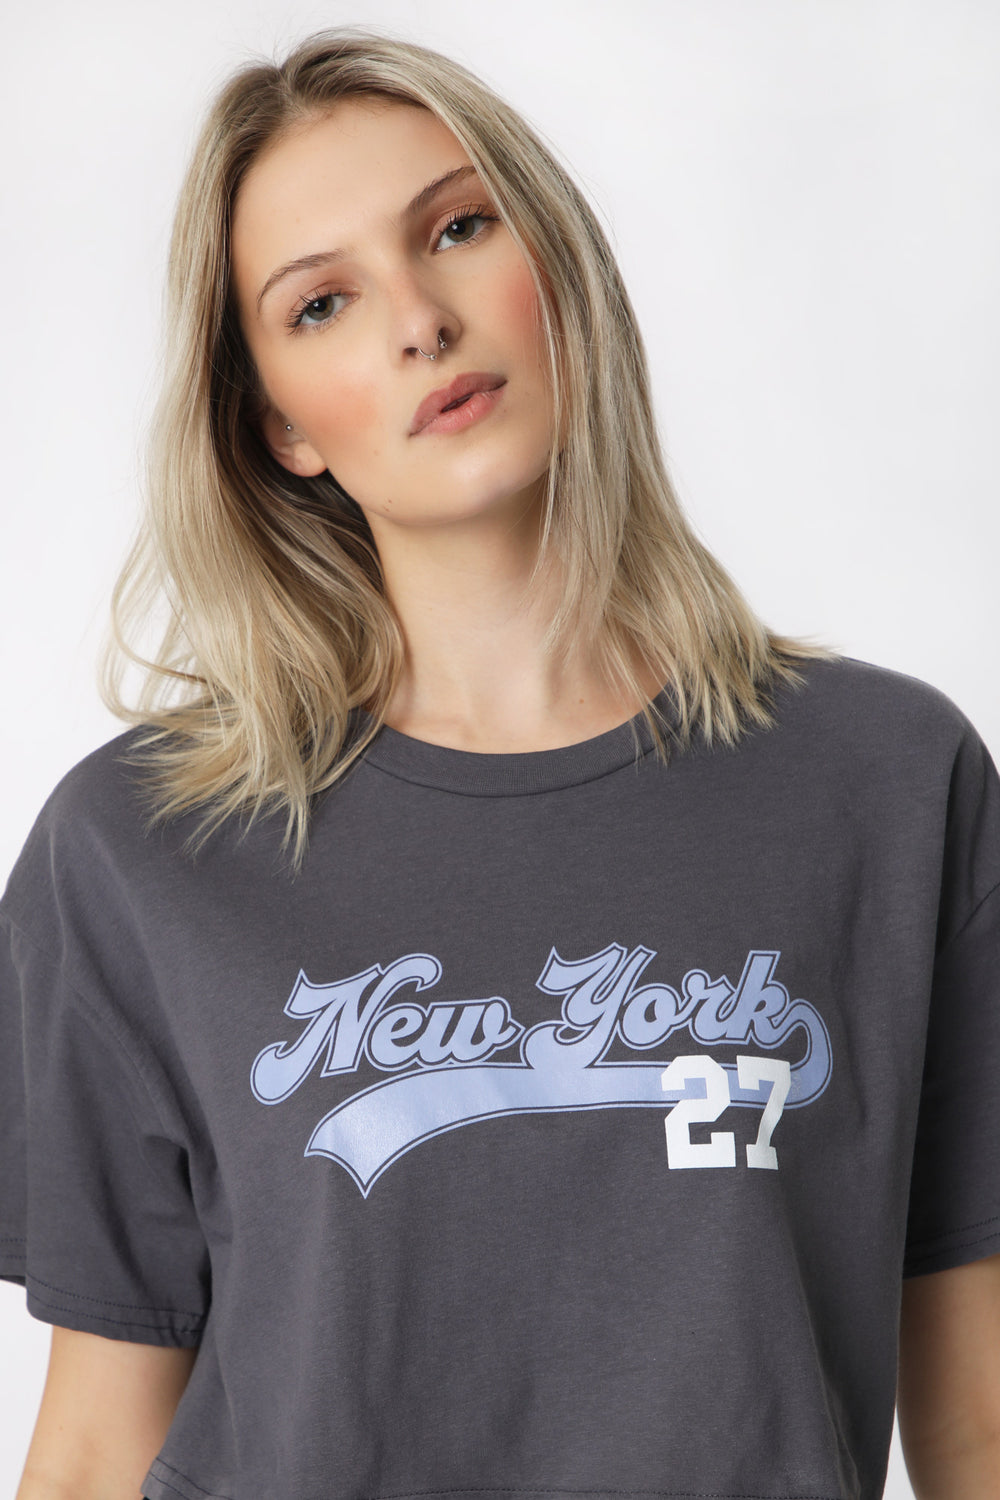 Womens New York 27 Cropped Tee Womens New York 27 Cropped Tee